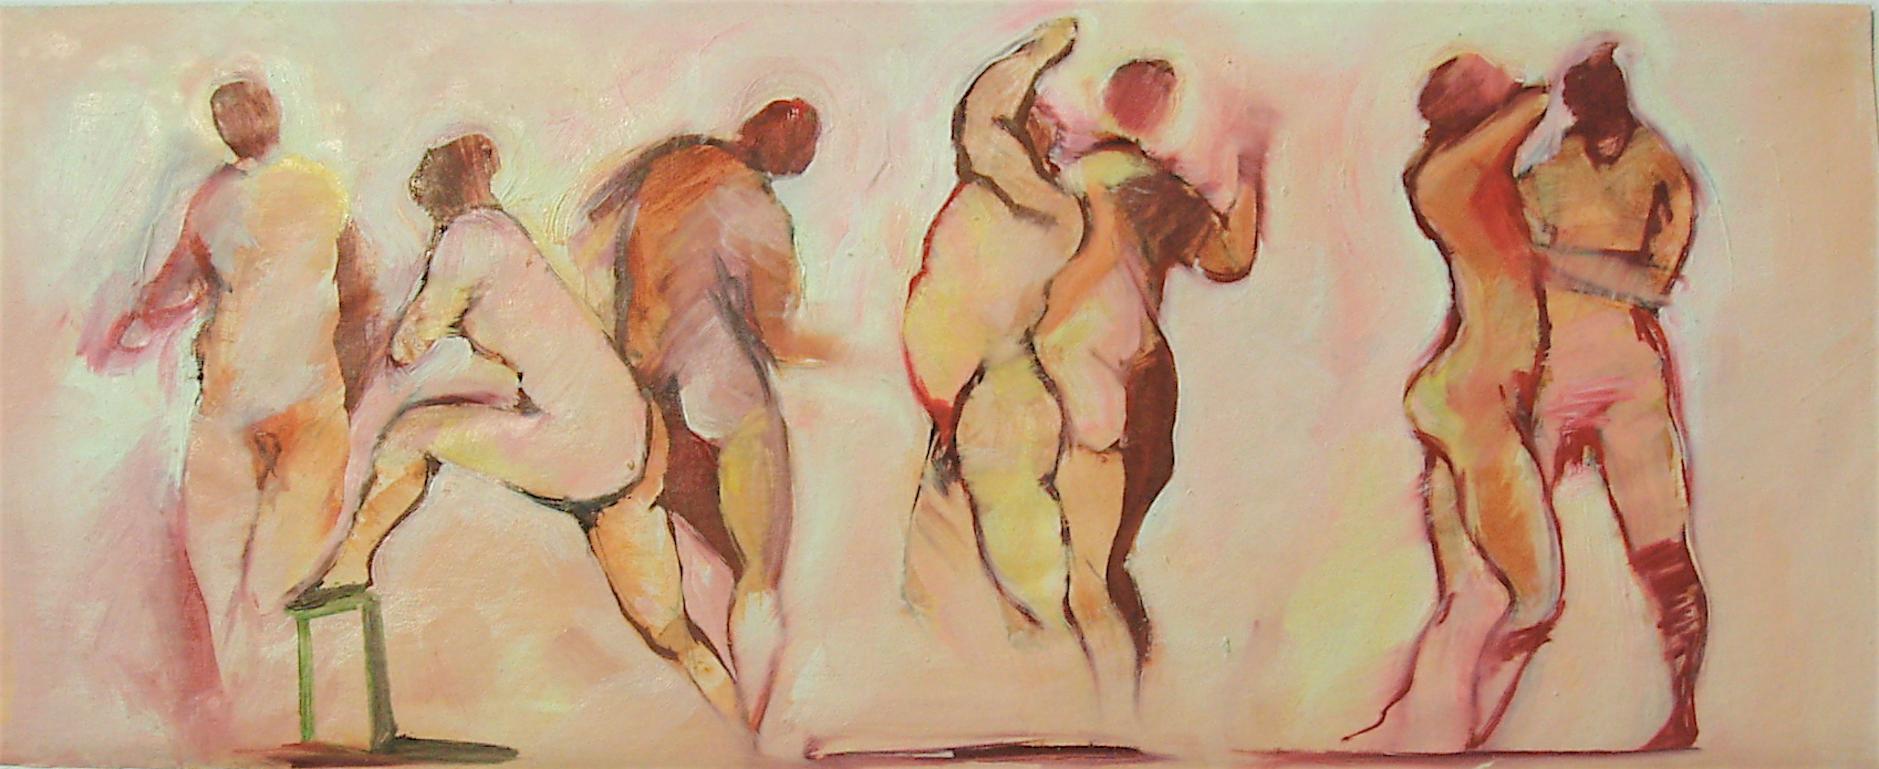 Silvina Mamani Nude Painting - Ellas (Female for "them"), nude women dancing, oil painting on paper